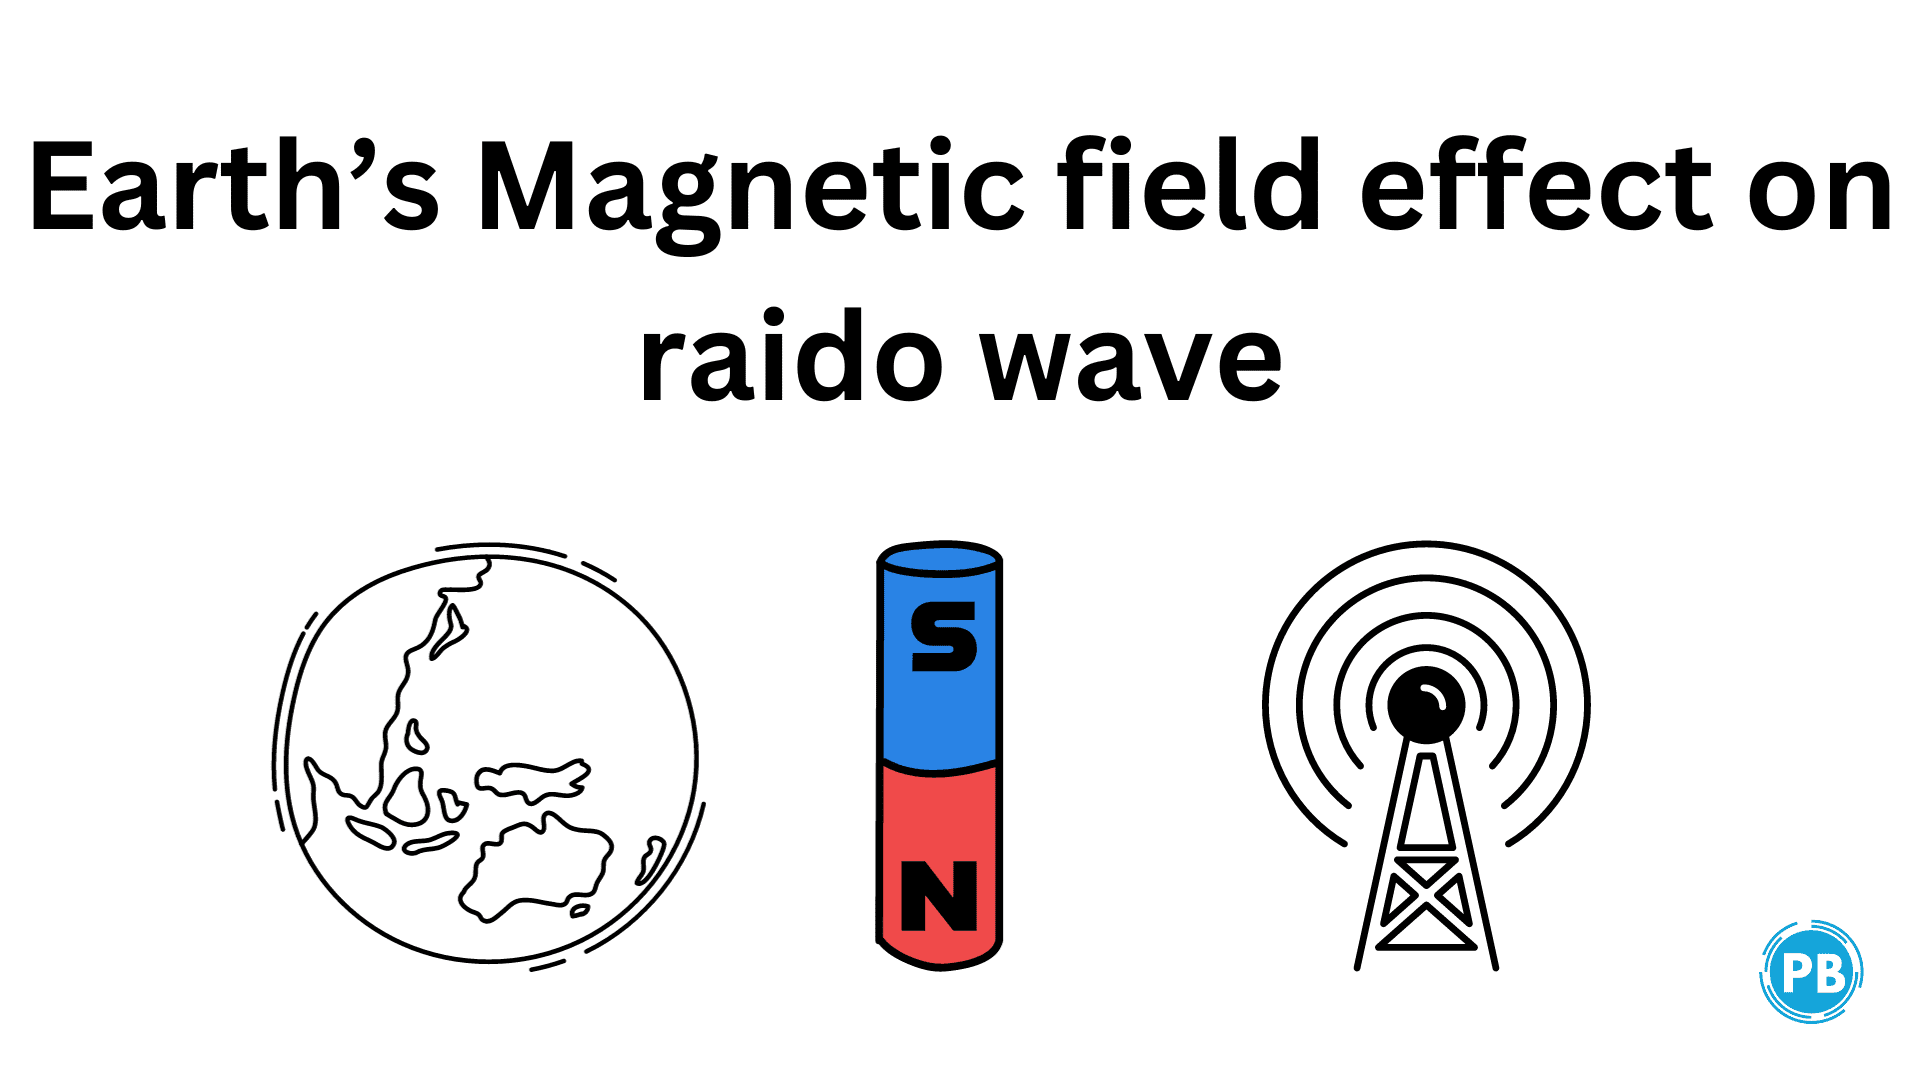 what is the effect of earth magnetic field on radio wave?